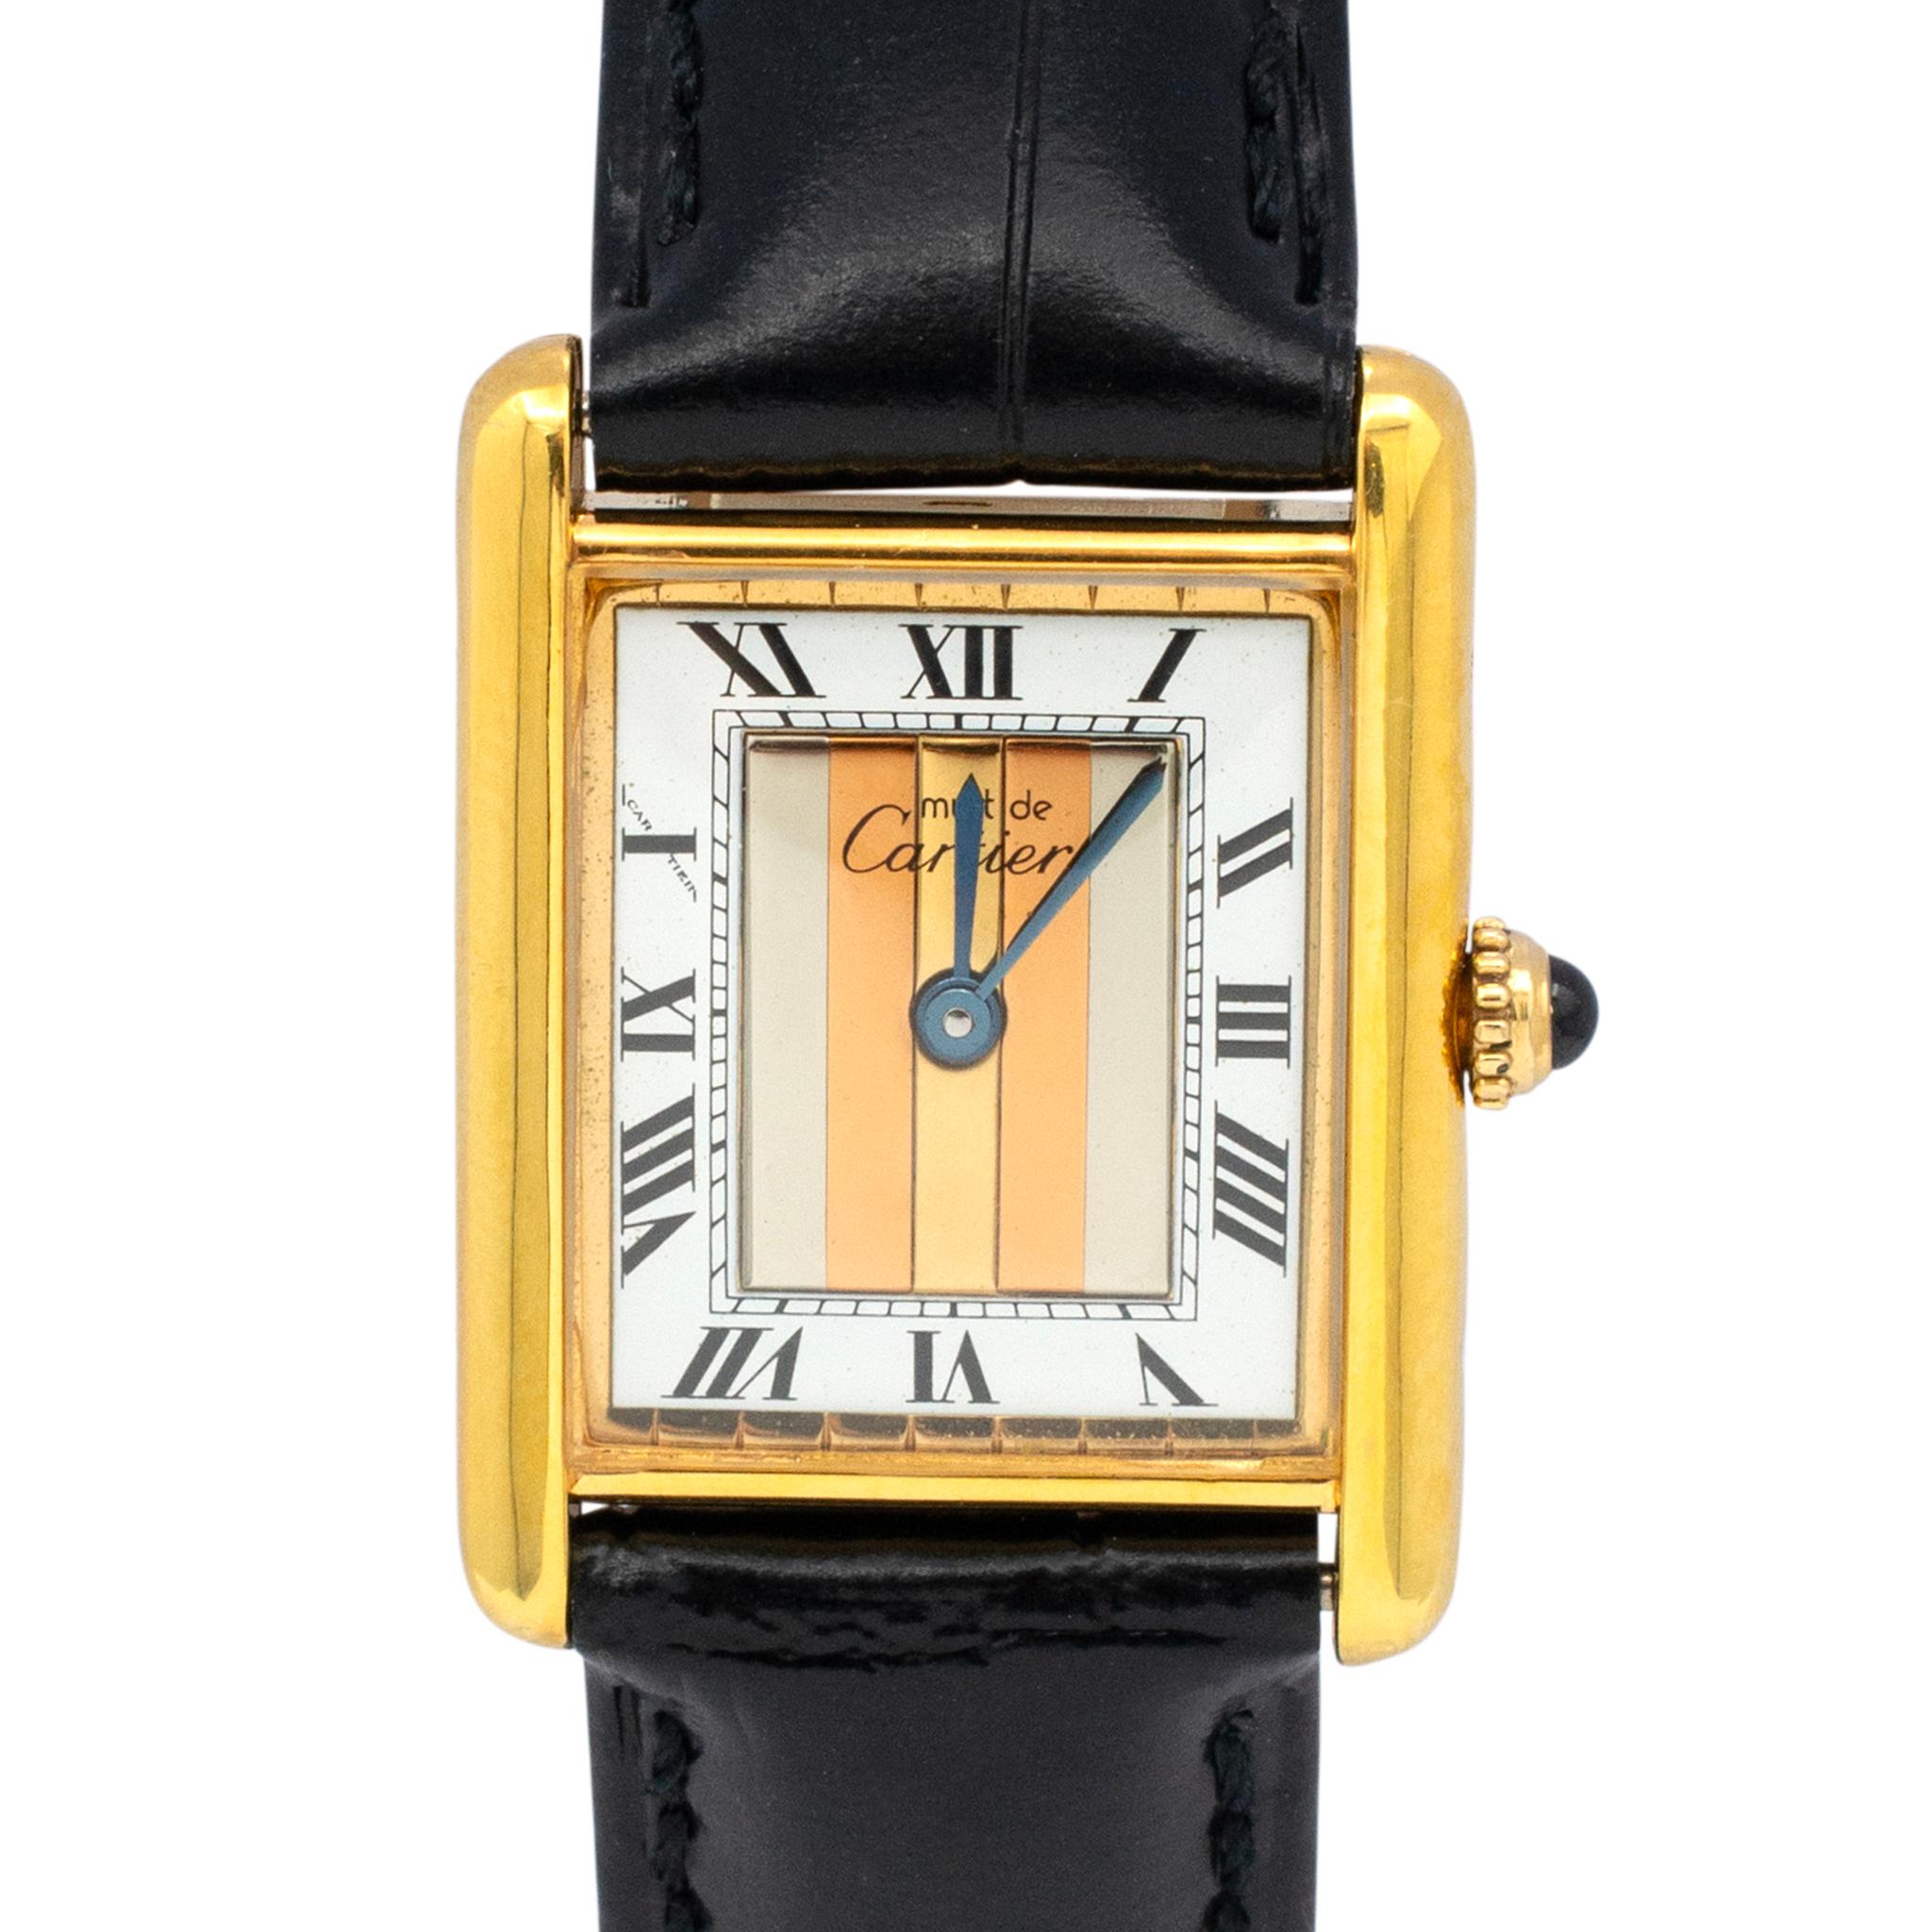 Brand: Cartier

Gender: Ladies

Weight: 25.60 grams
Ladies Cartier Swiss made watch. Engraved with 